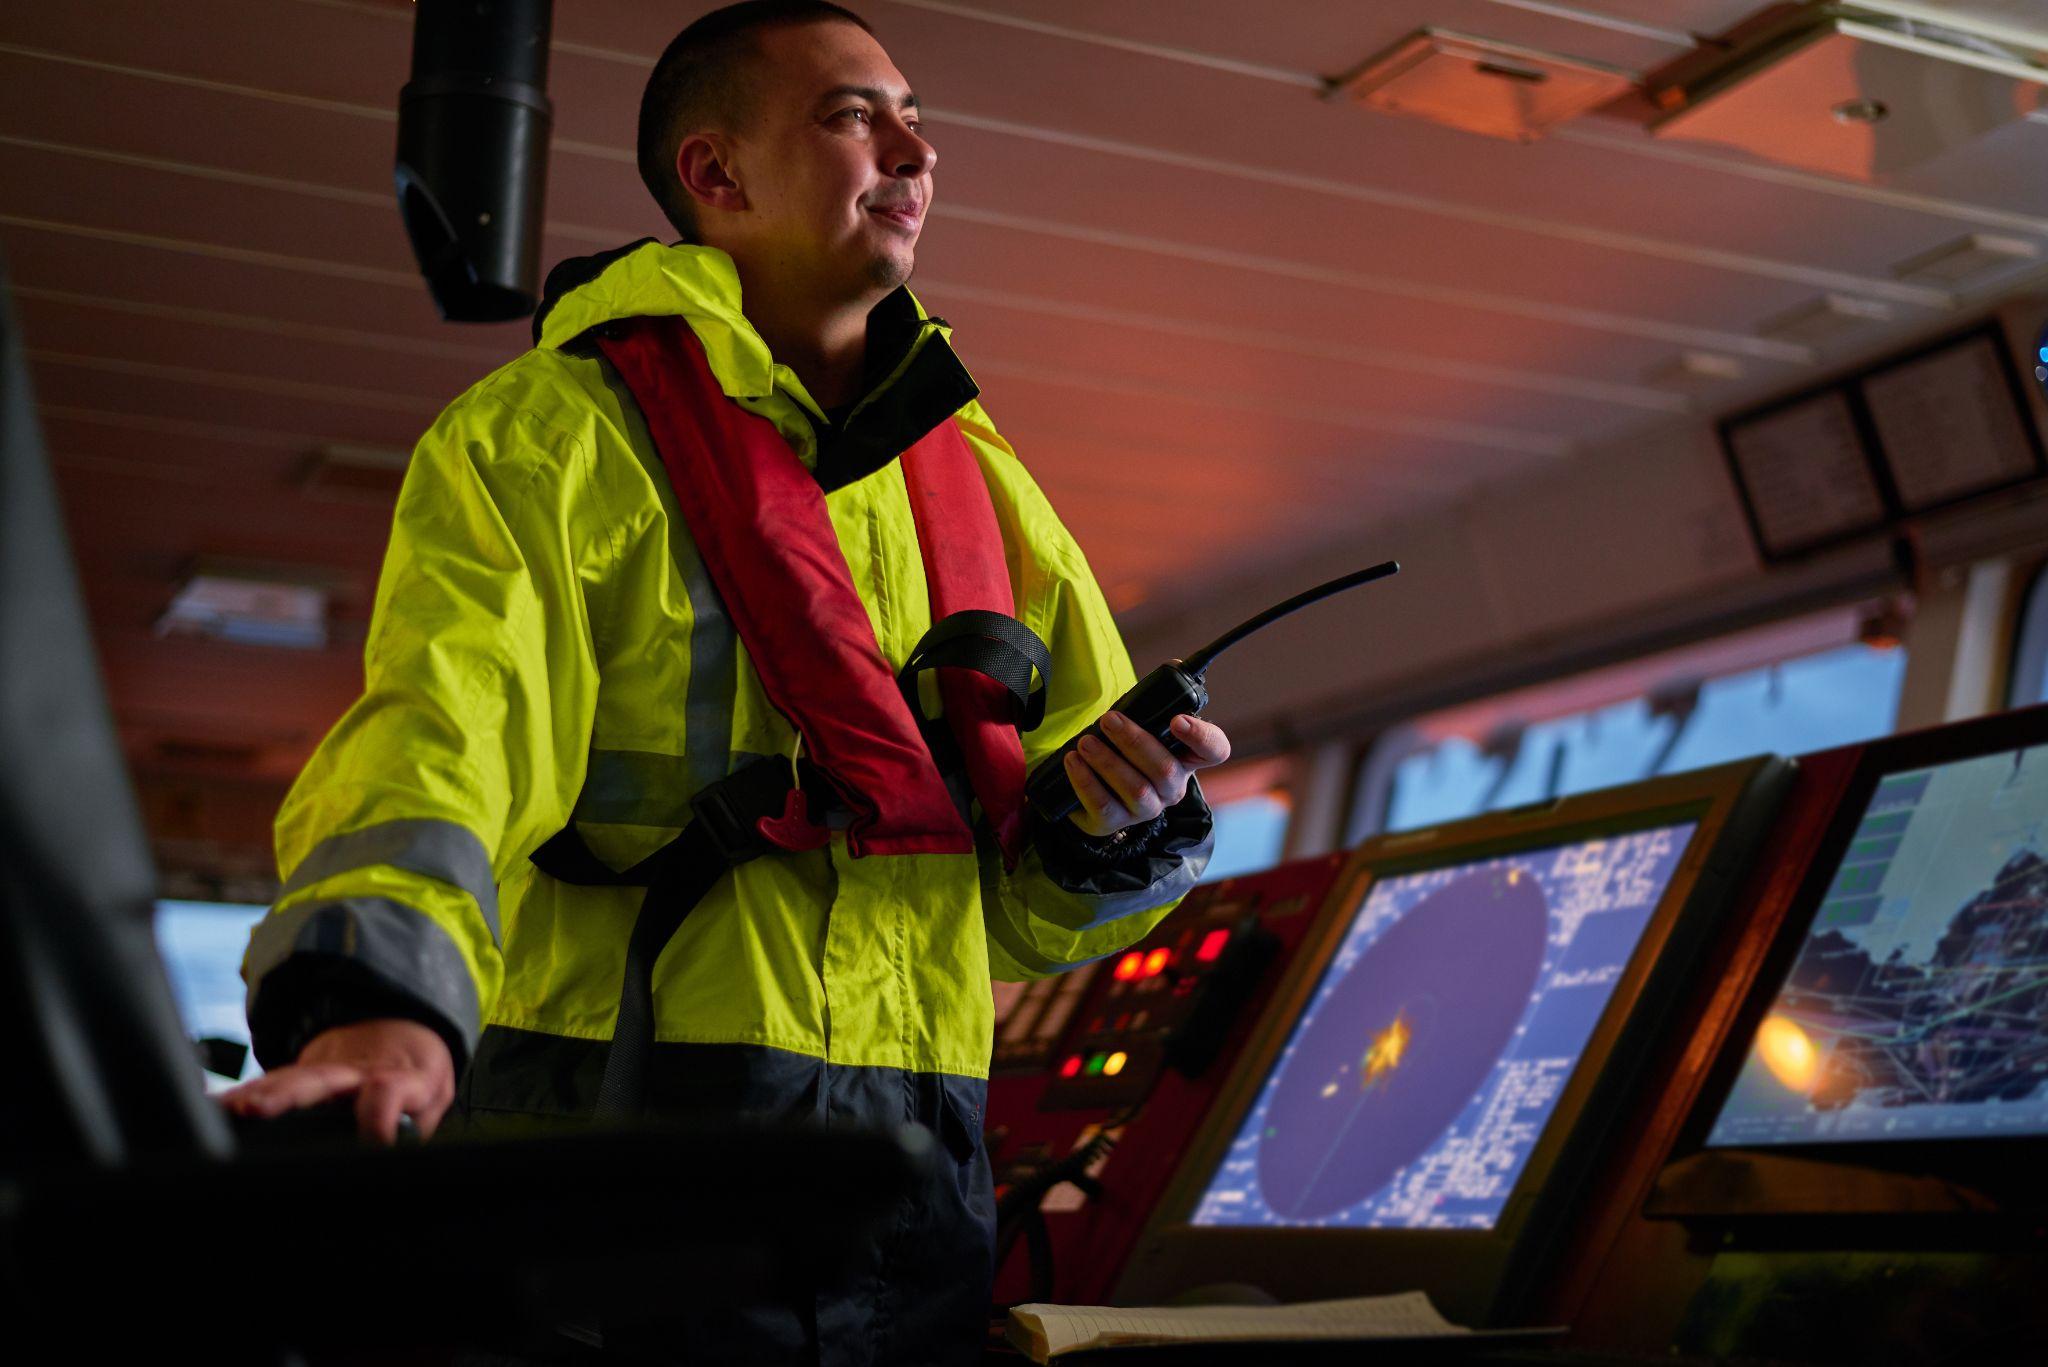 captain part of ship crew performing daily duties with VHF radio